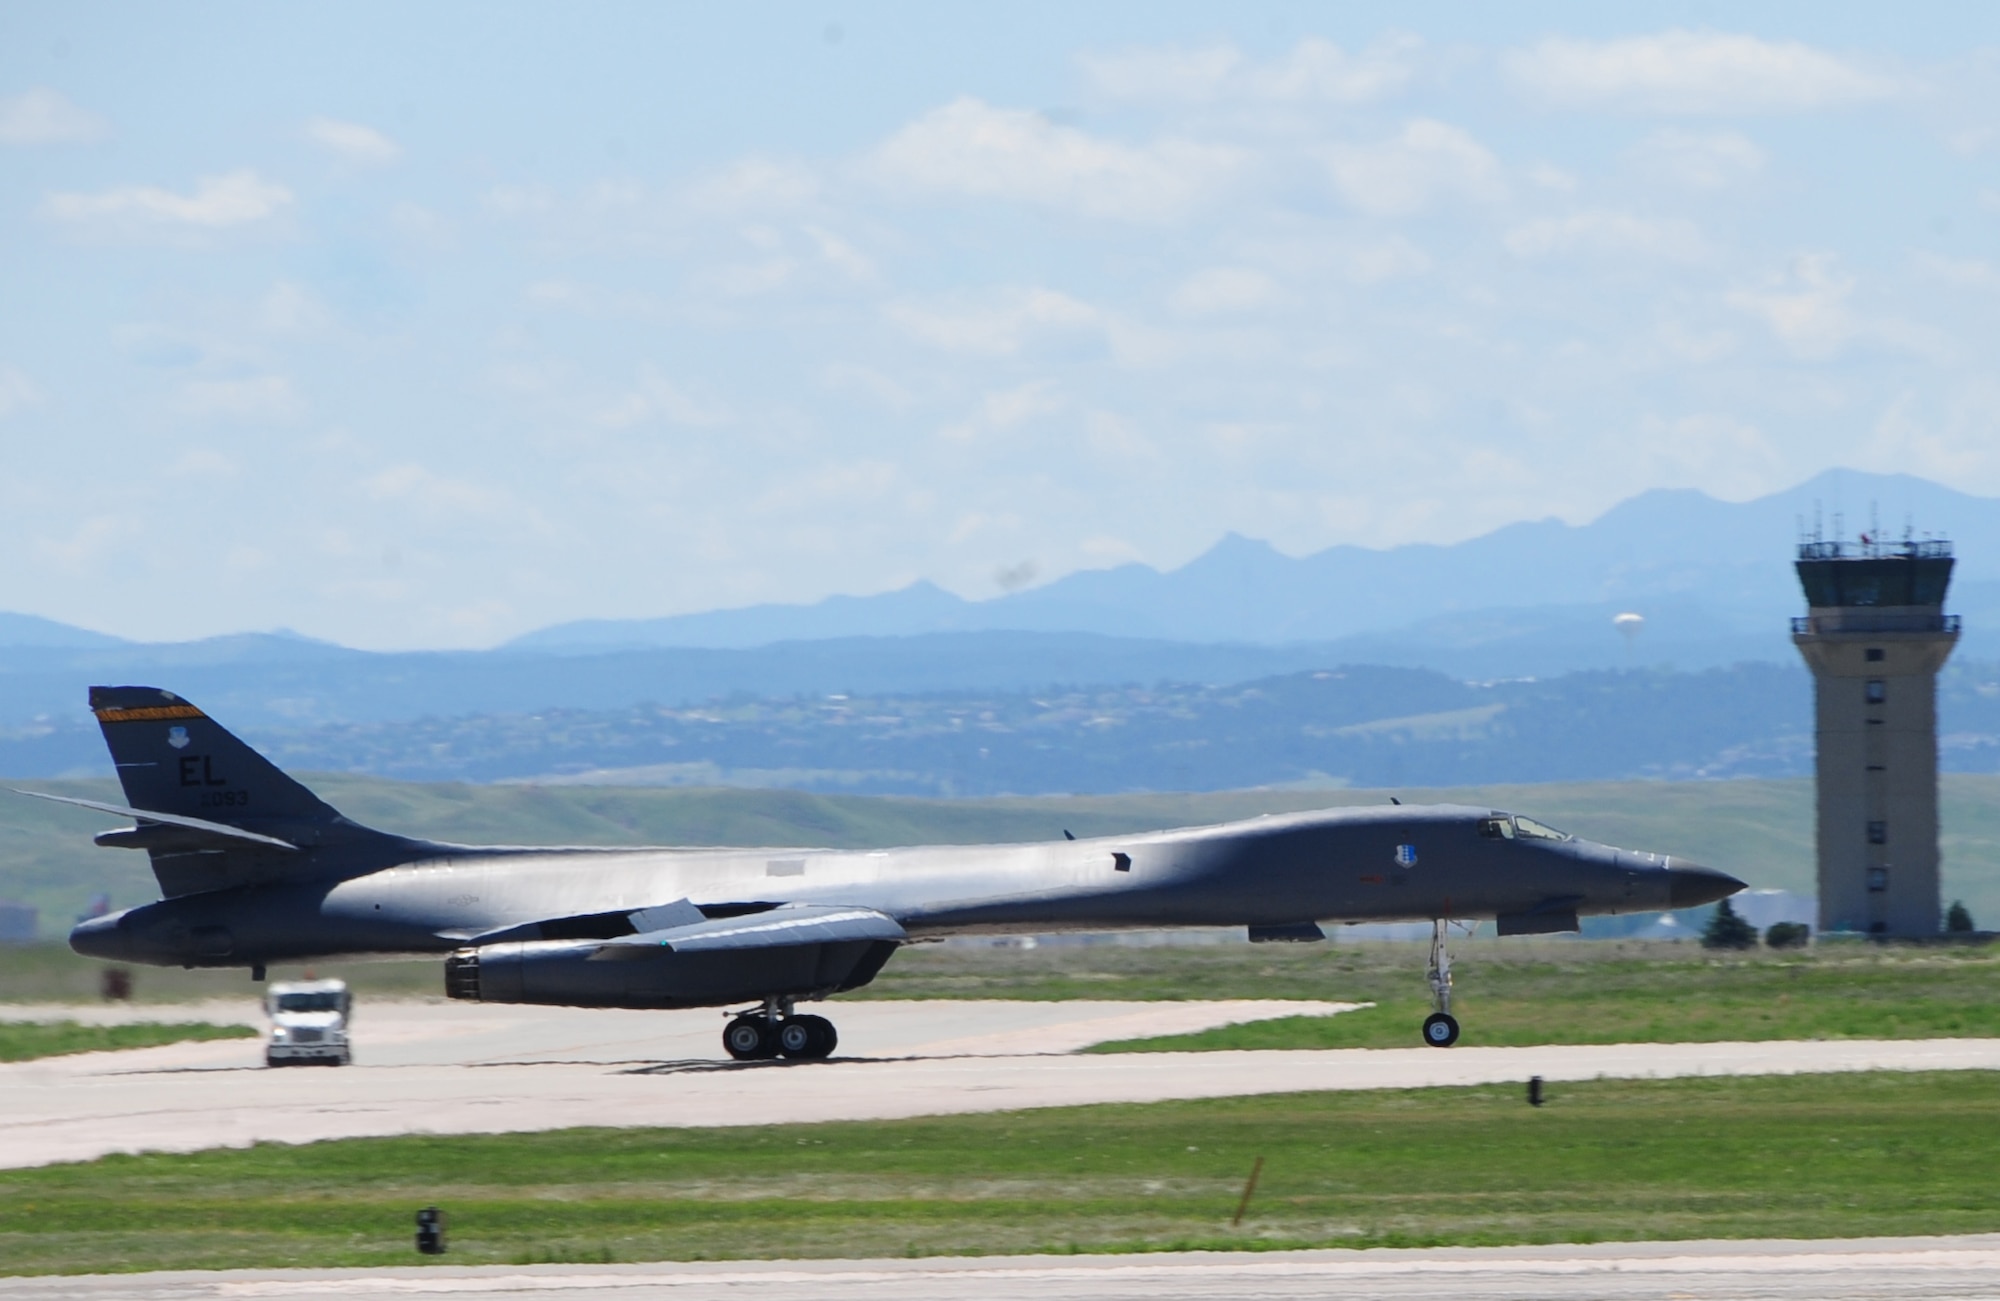 ELLSWORTH AIR FORCE BASE S.D. -- A B-1B Lancer takes off during a phase II
operational readiness exercise, July 20.  The B-1's forward-wing settings
are used for takeoff, landing, air refueling and in some high-altitude
weapons employment scenarios. (U.S. Air Force photo/Airman 1st Class Anthony
Sanchelli)
